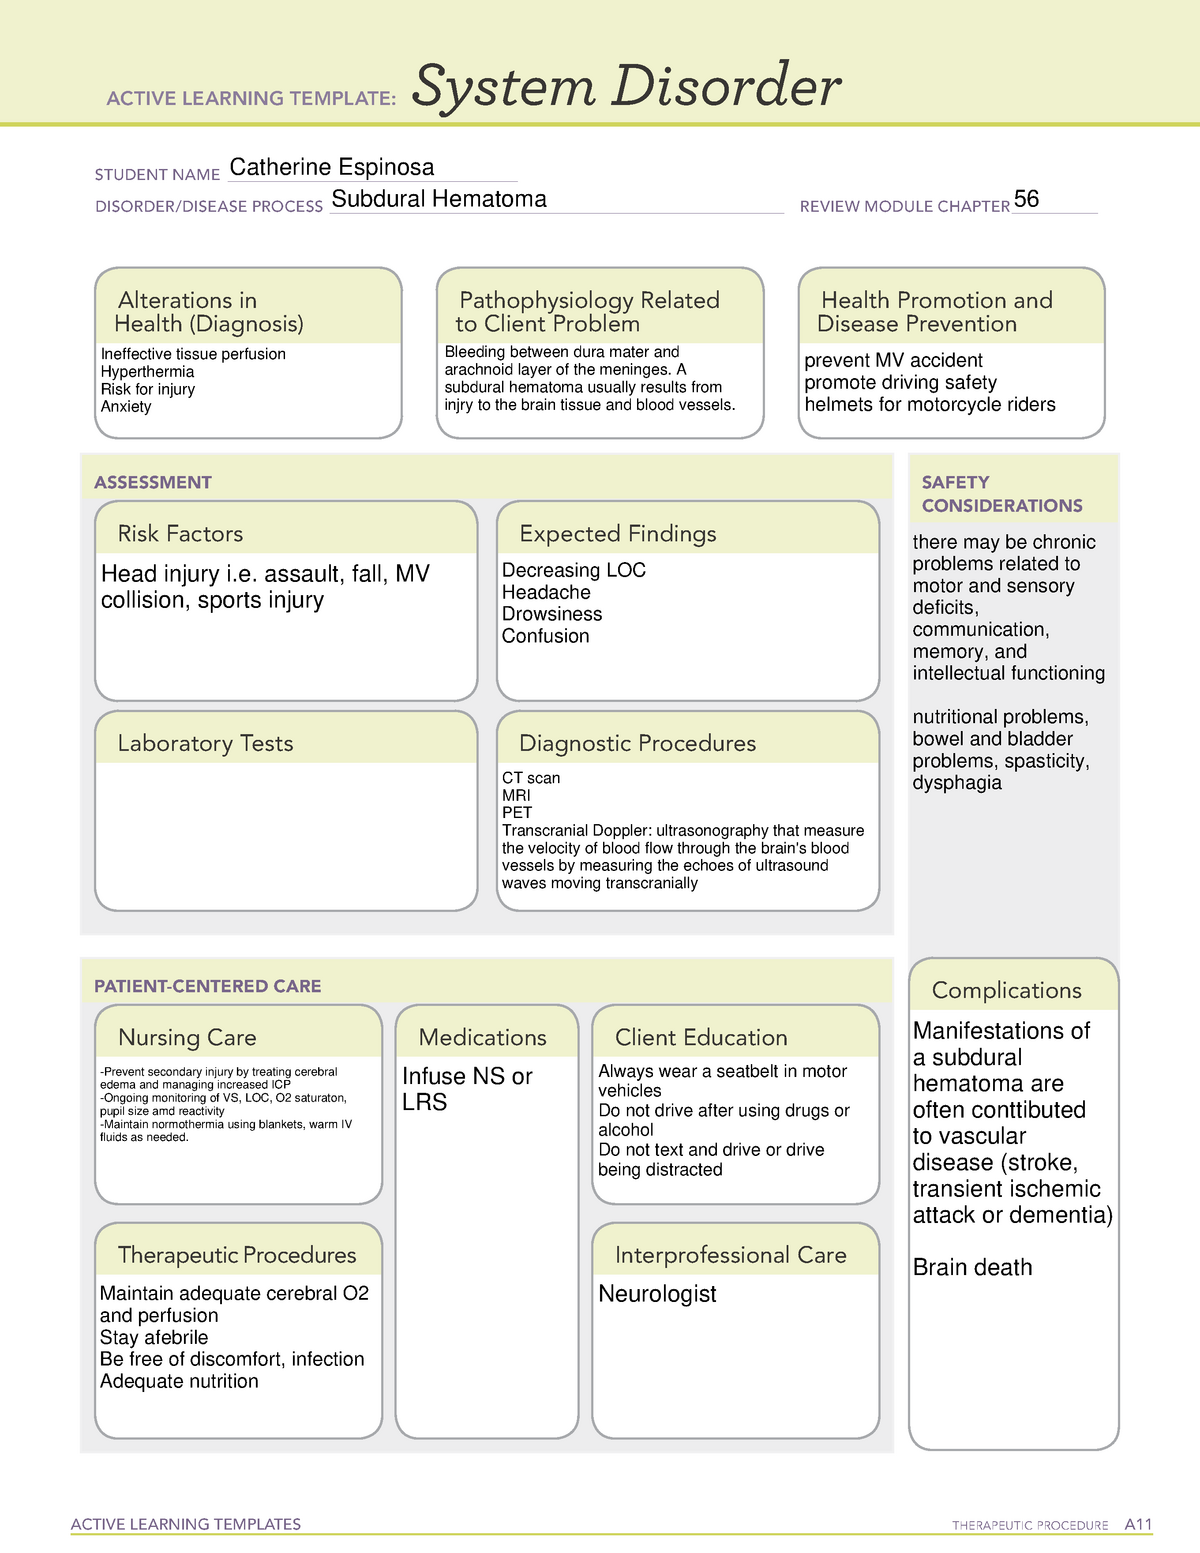 Subdural Hematoma System Disorder ACTIVE LEARNING TEMPLATES